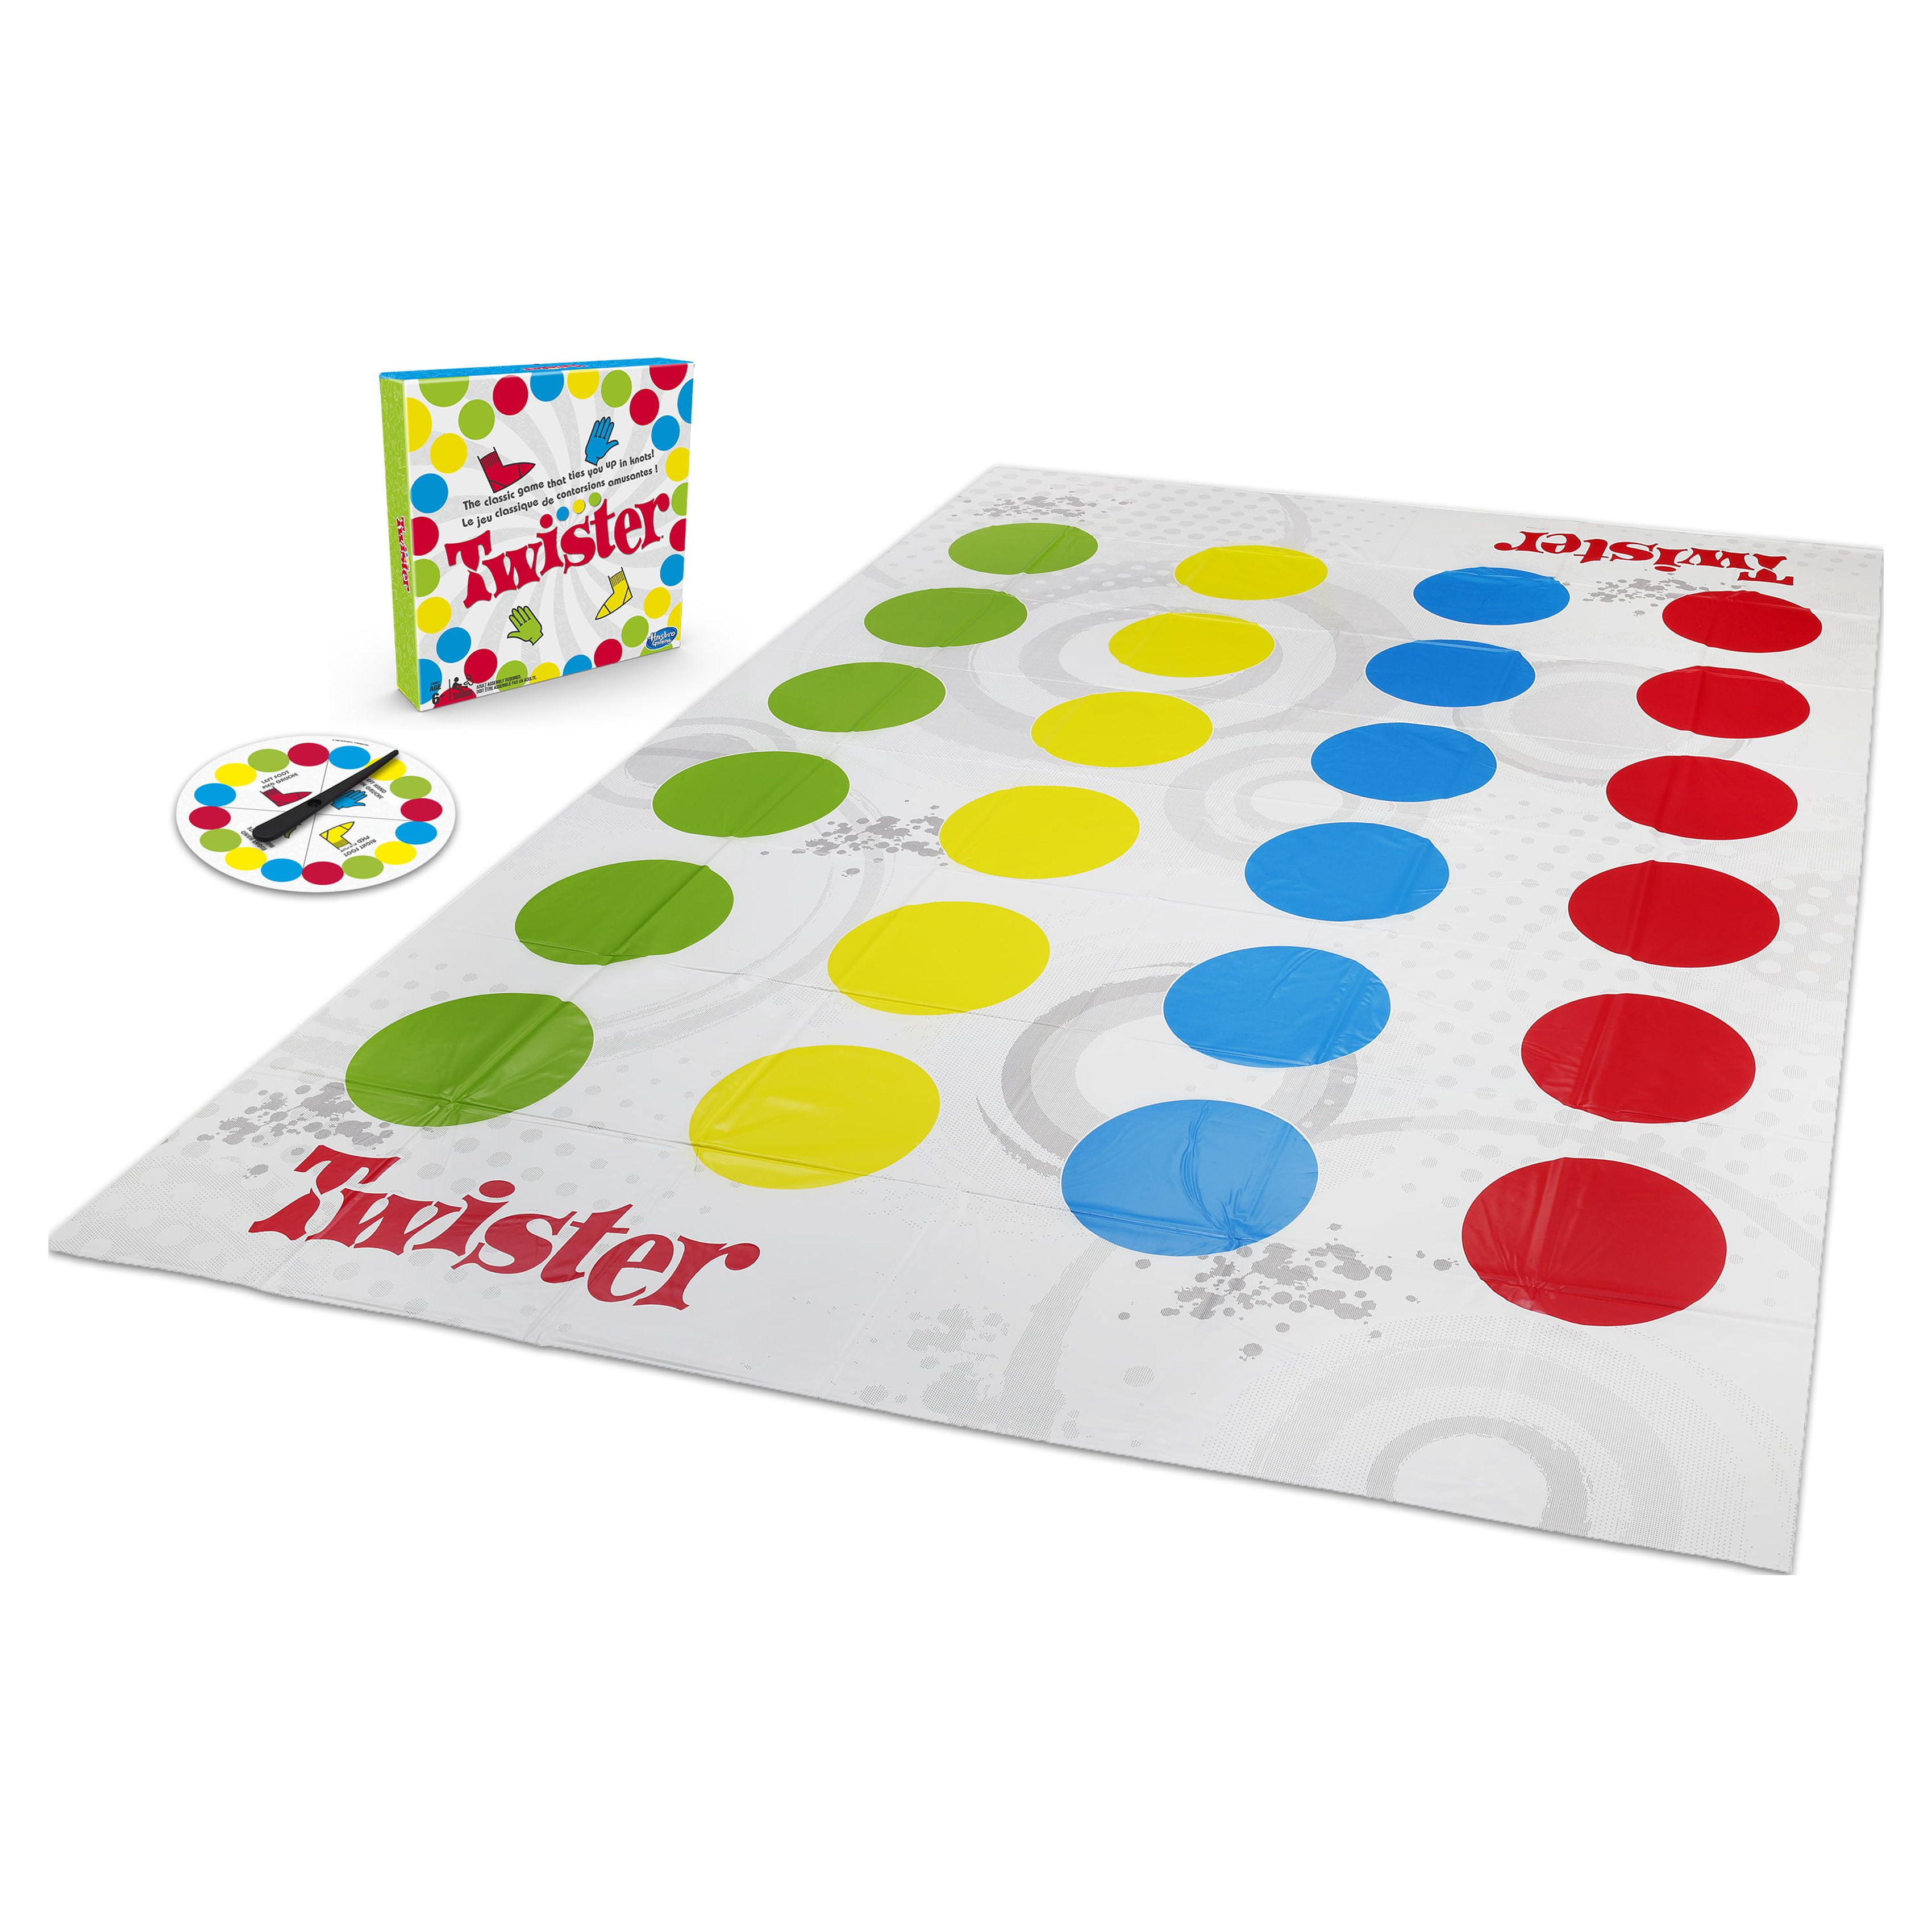 Classic Twister Moves Game Funny Family Friend Board Game Outdoor Sports  Toys